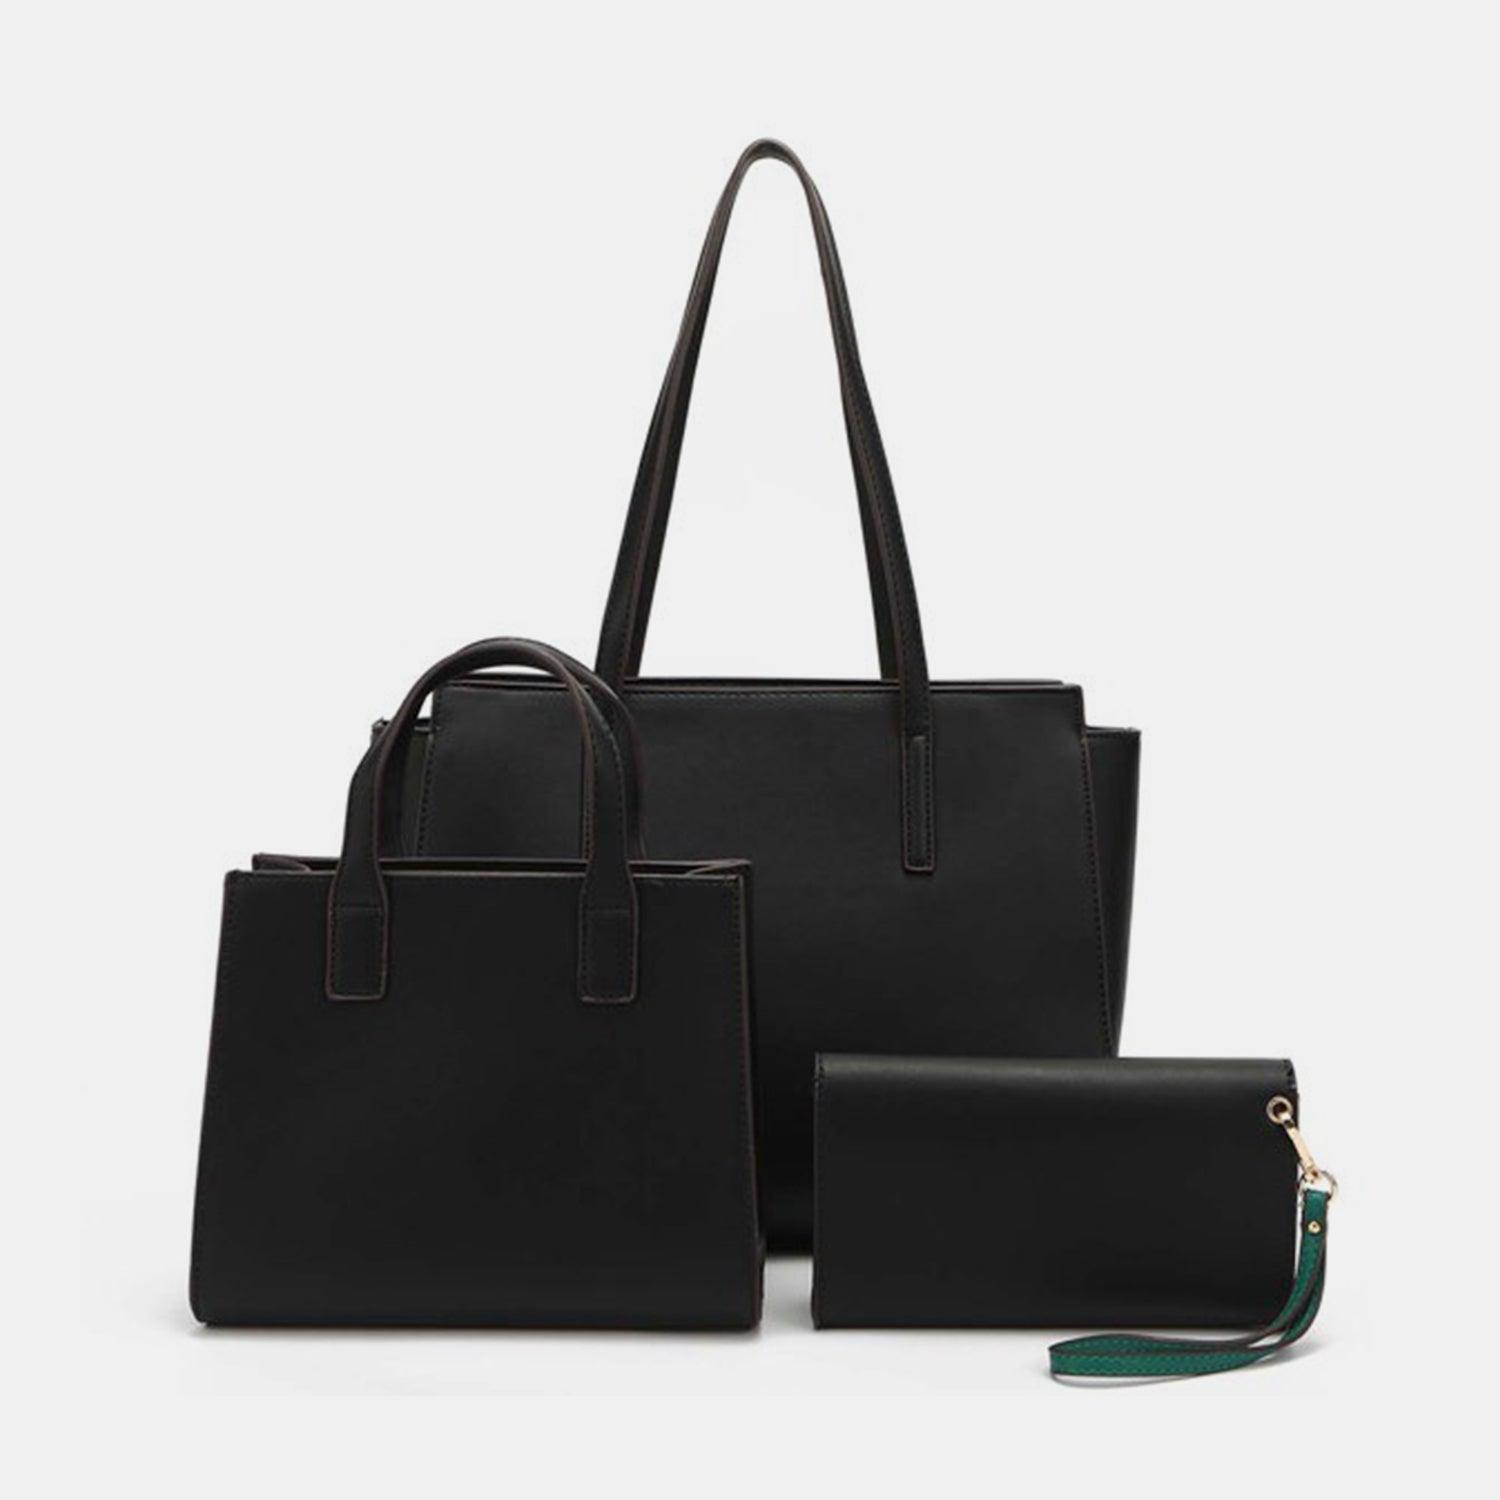 a black handbag and wallet sitting next to each other